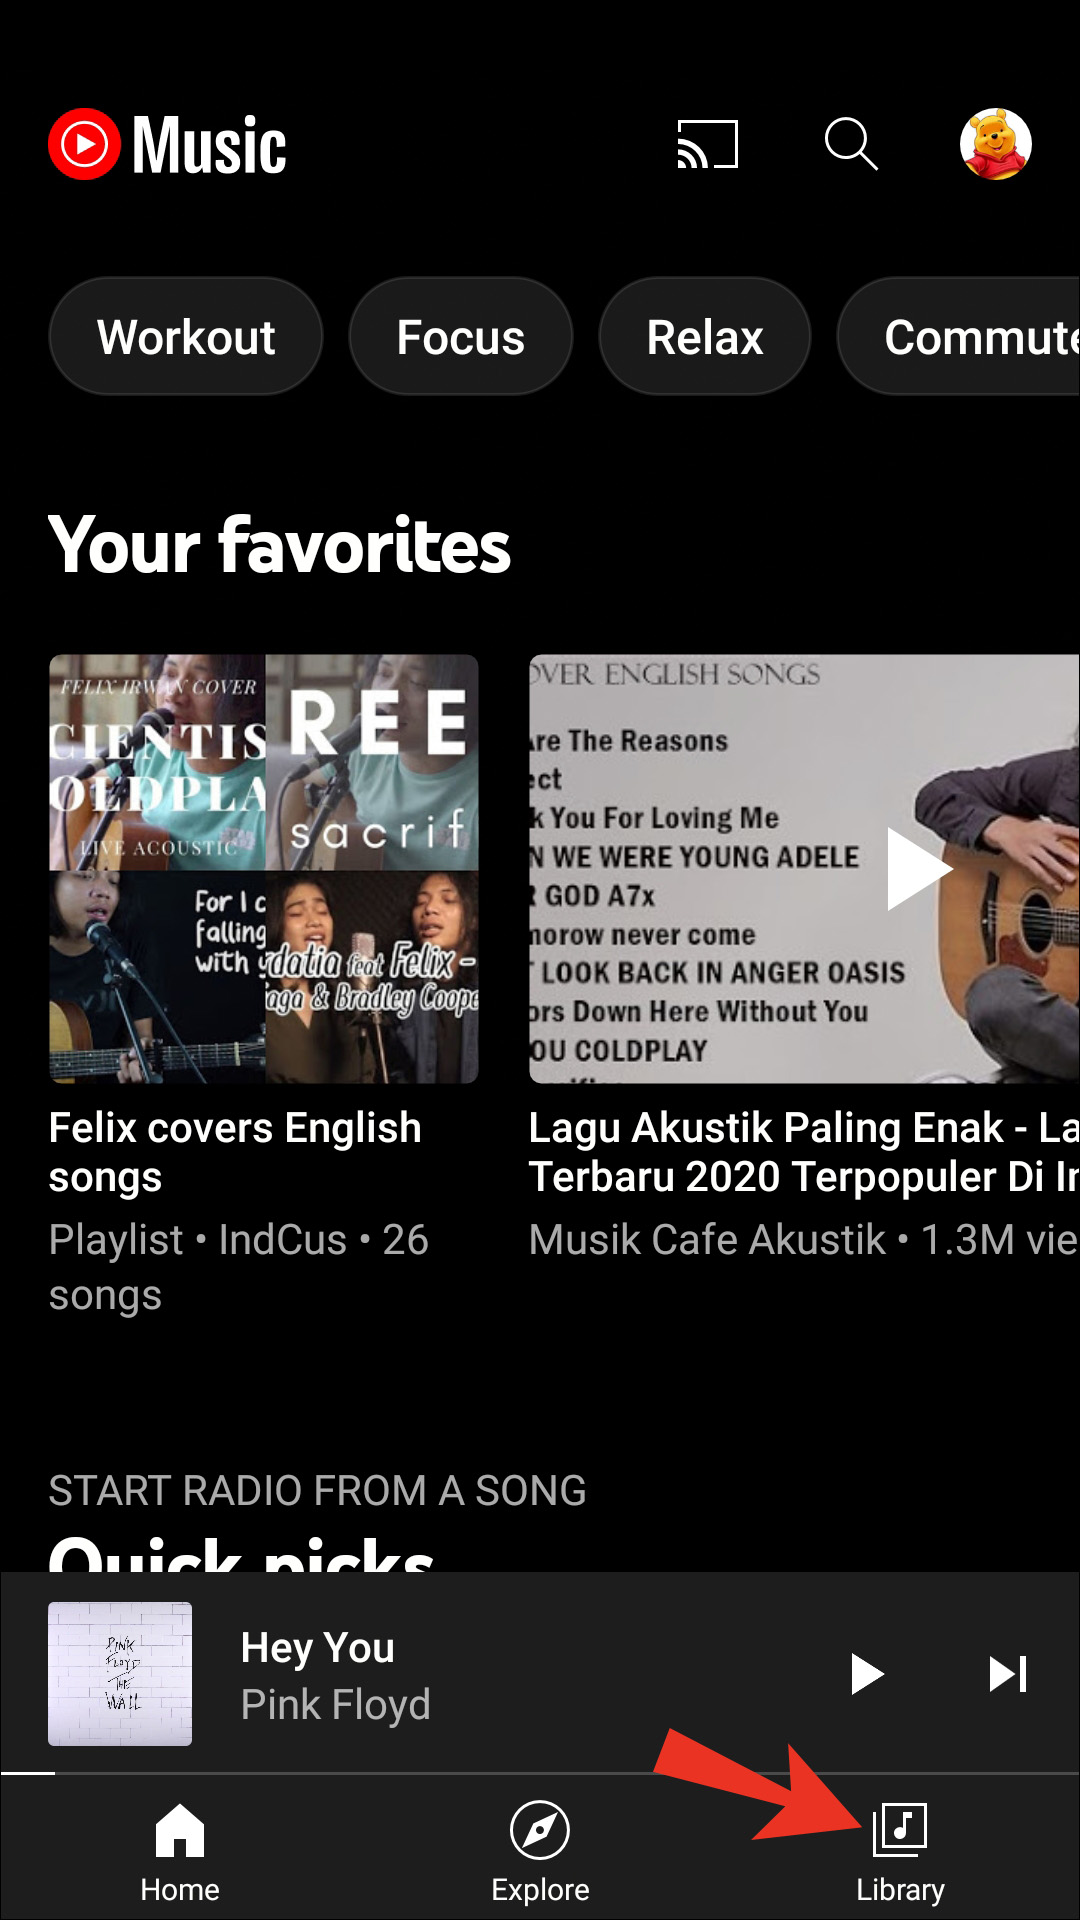 How to Add or Remove Songs from the Library in YouTube Music